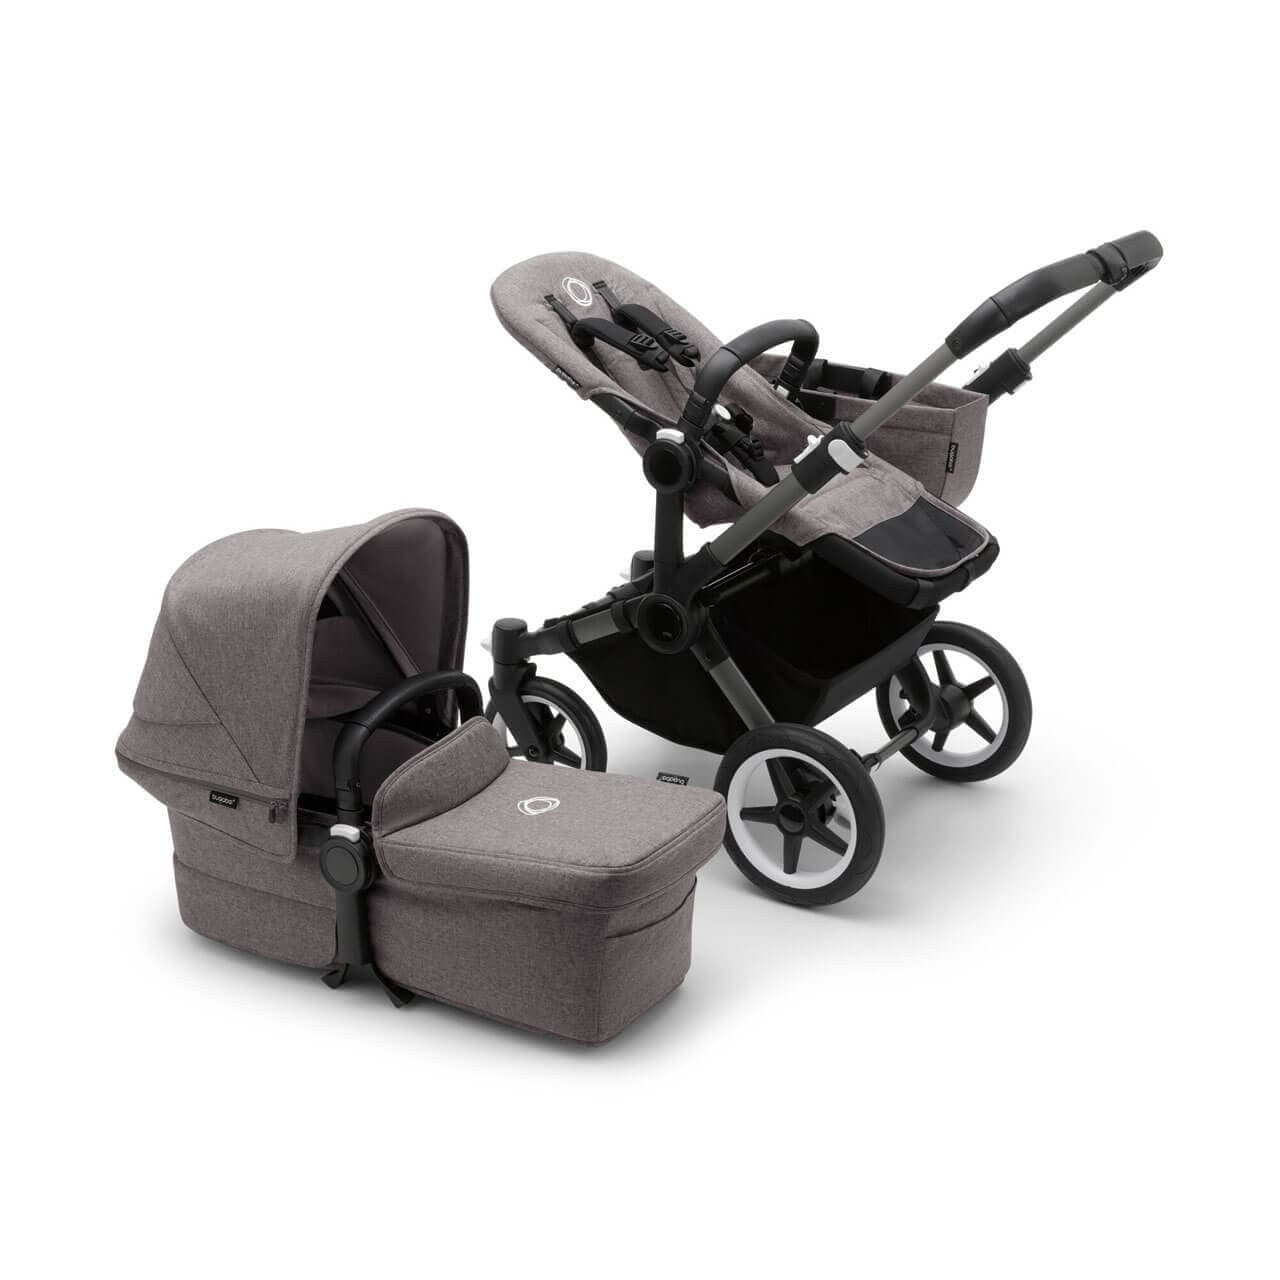 Bugaboo Donkey 5 Mono Complete Travel System + Turtle Air - Graphite/Grey Melange - For Your Little One